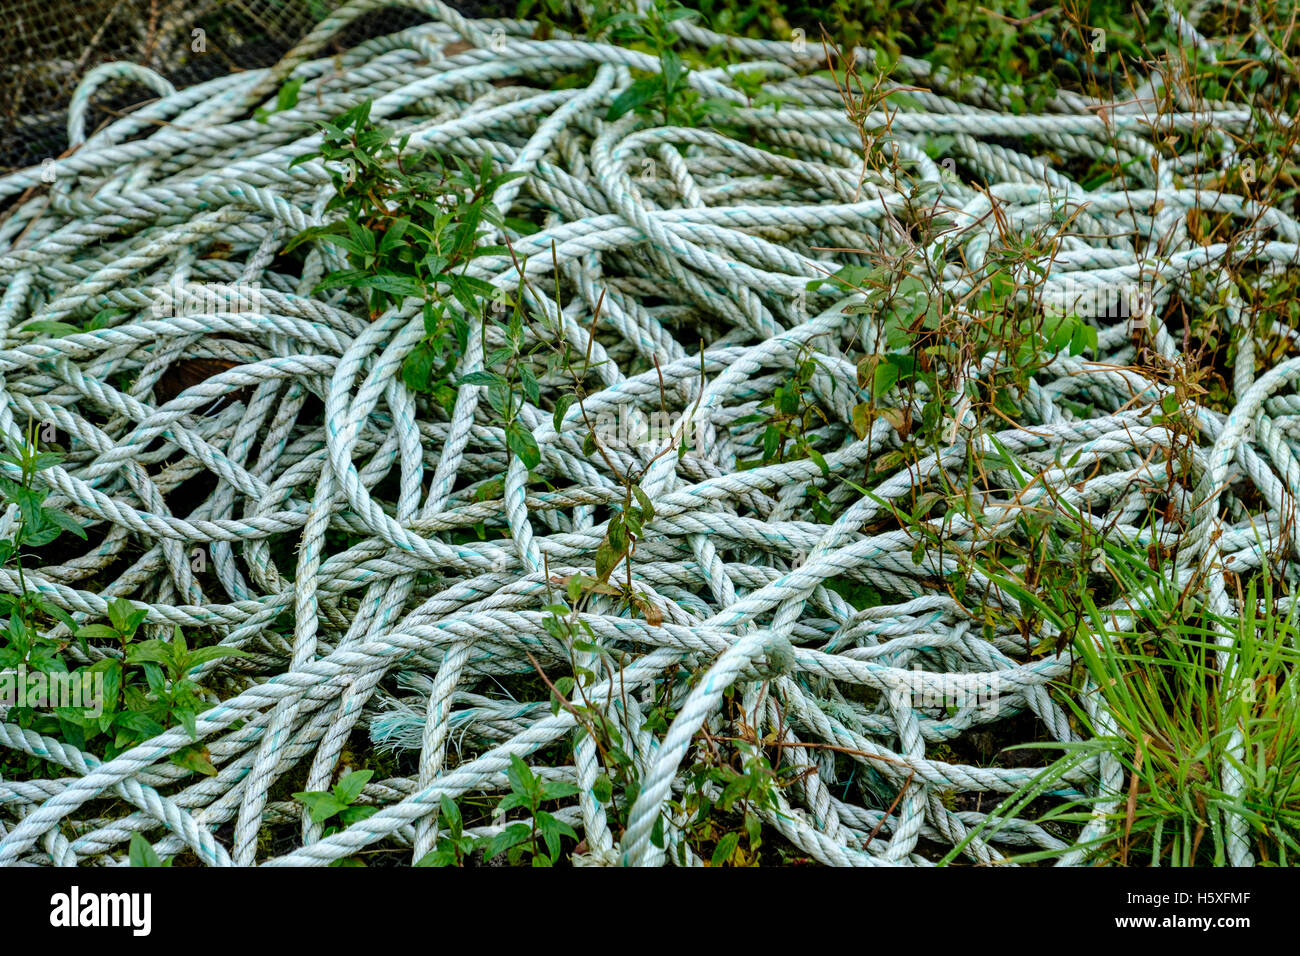 Grass and weeds growing through a tangle of fisherman's rope Stock Photo